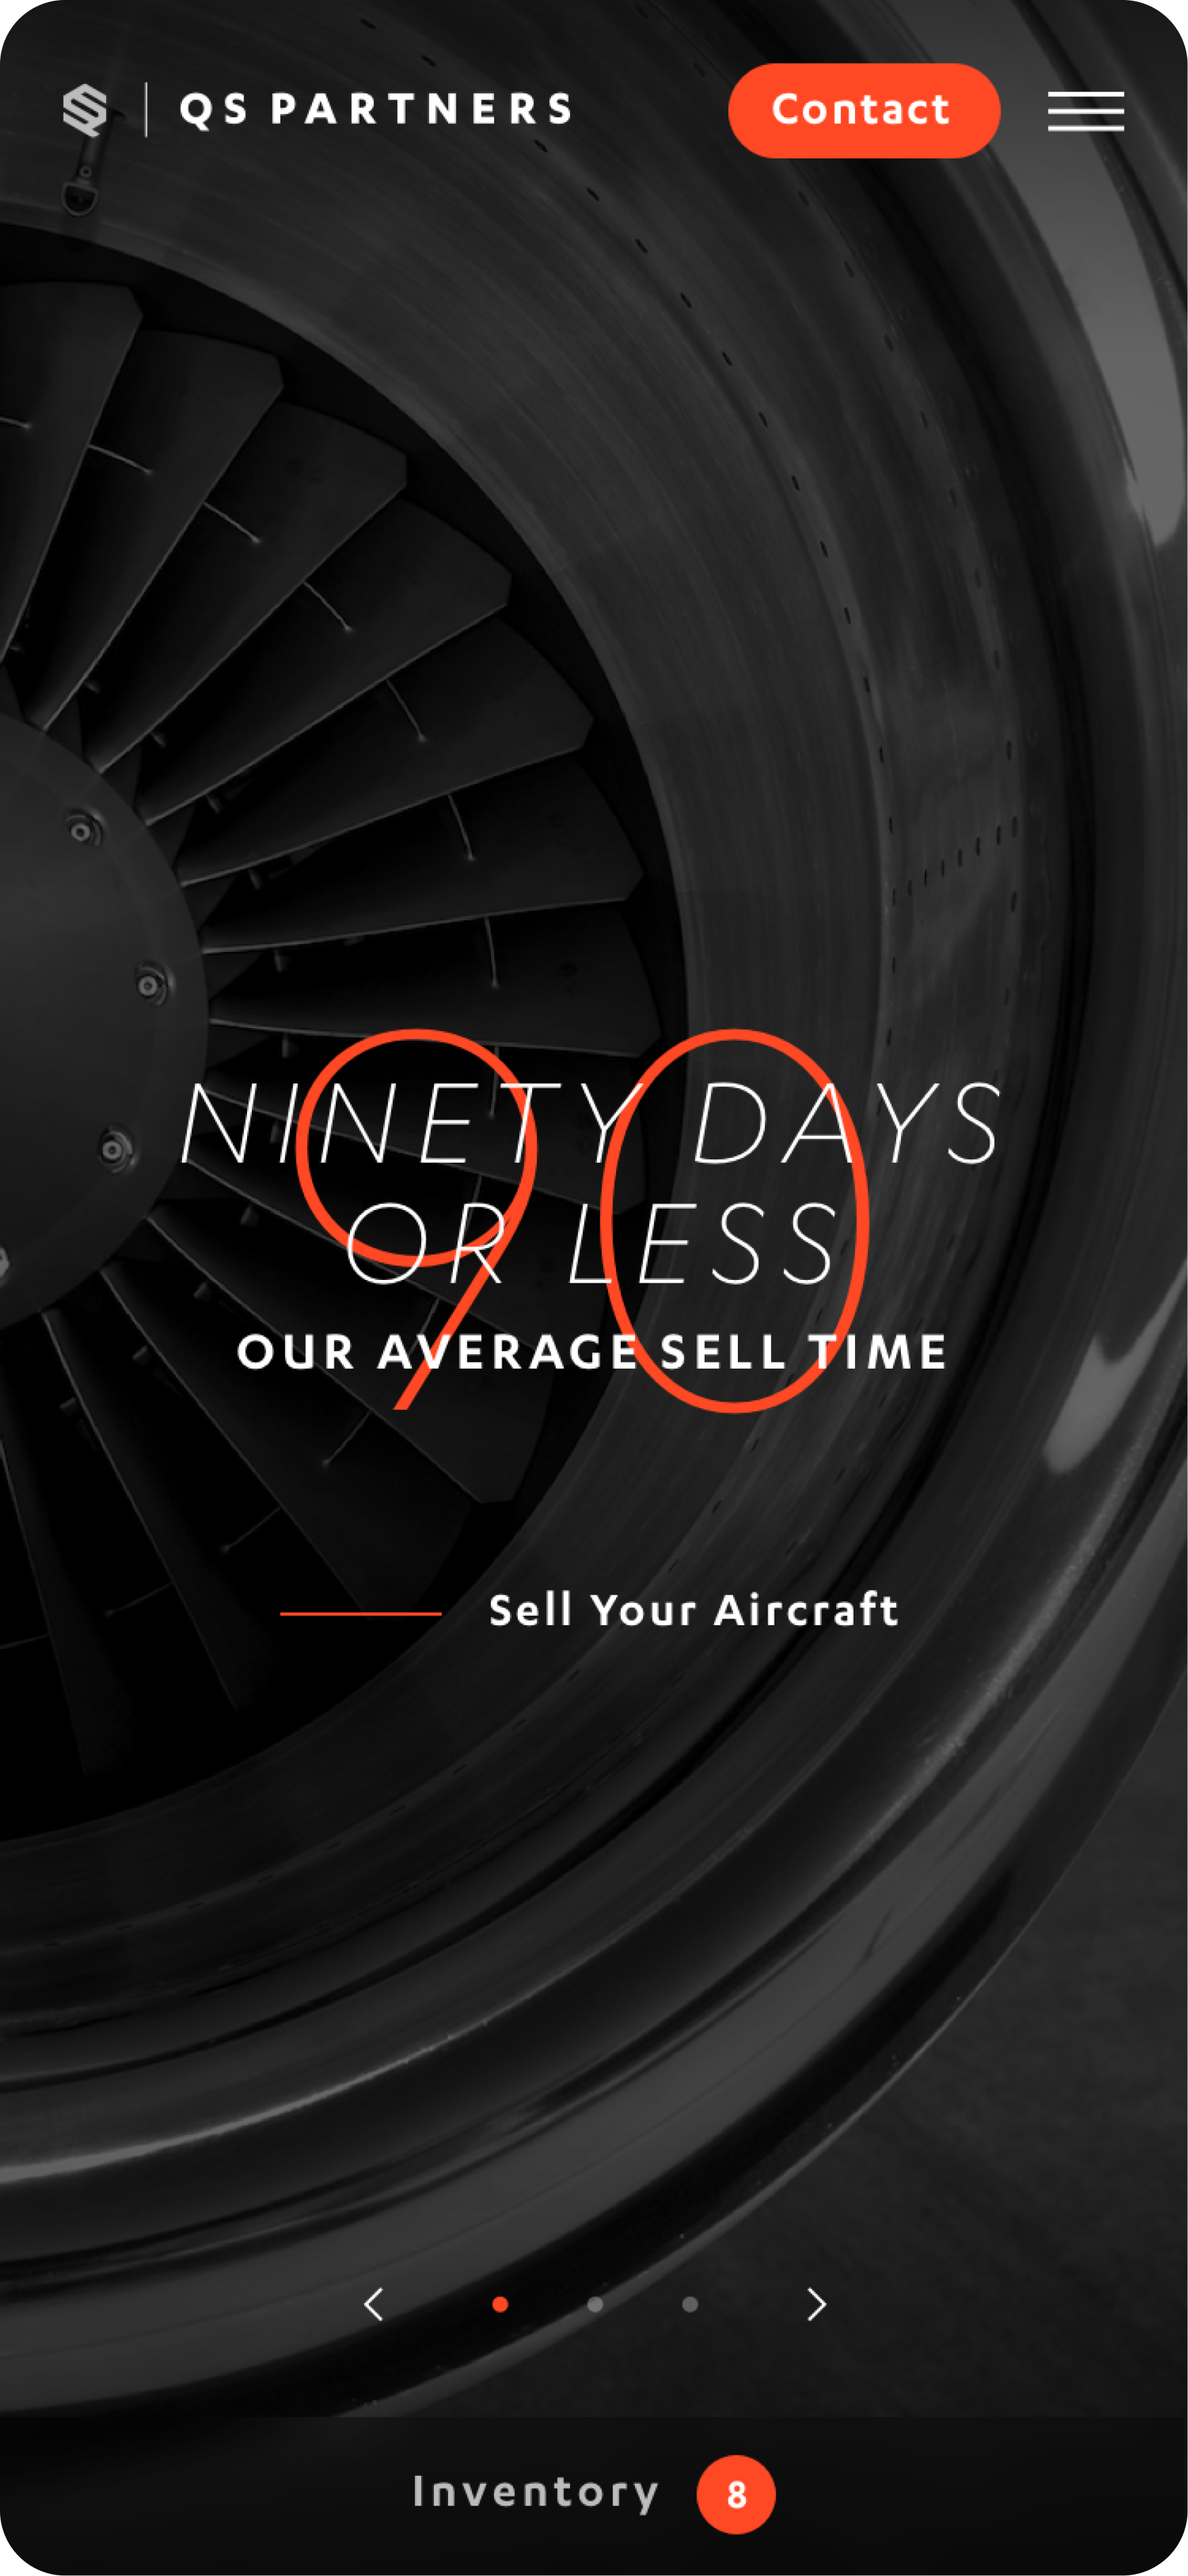 QS Partners Homepage which reads "90 Days or Less Our Average Sale Time" with "Sell Your Aircraft" and "Our Inventory" CTAs